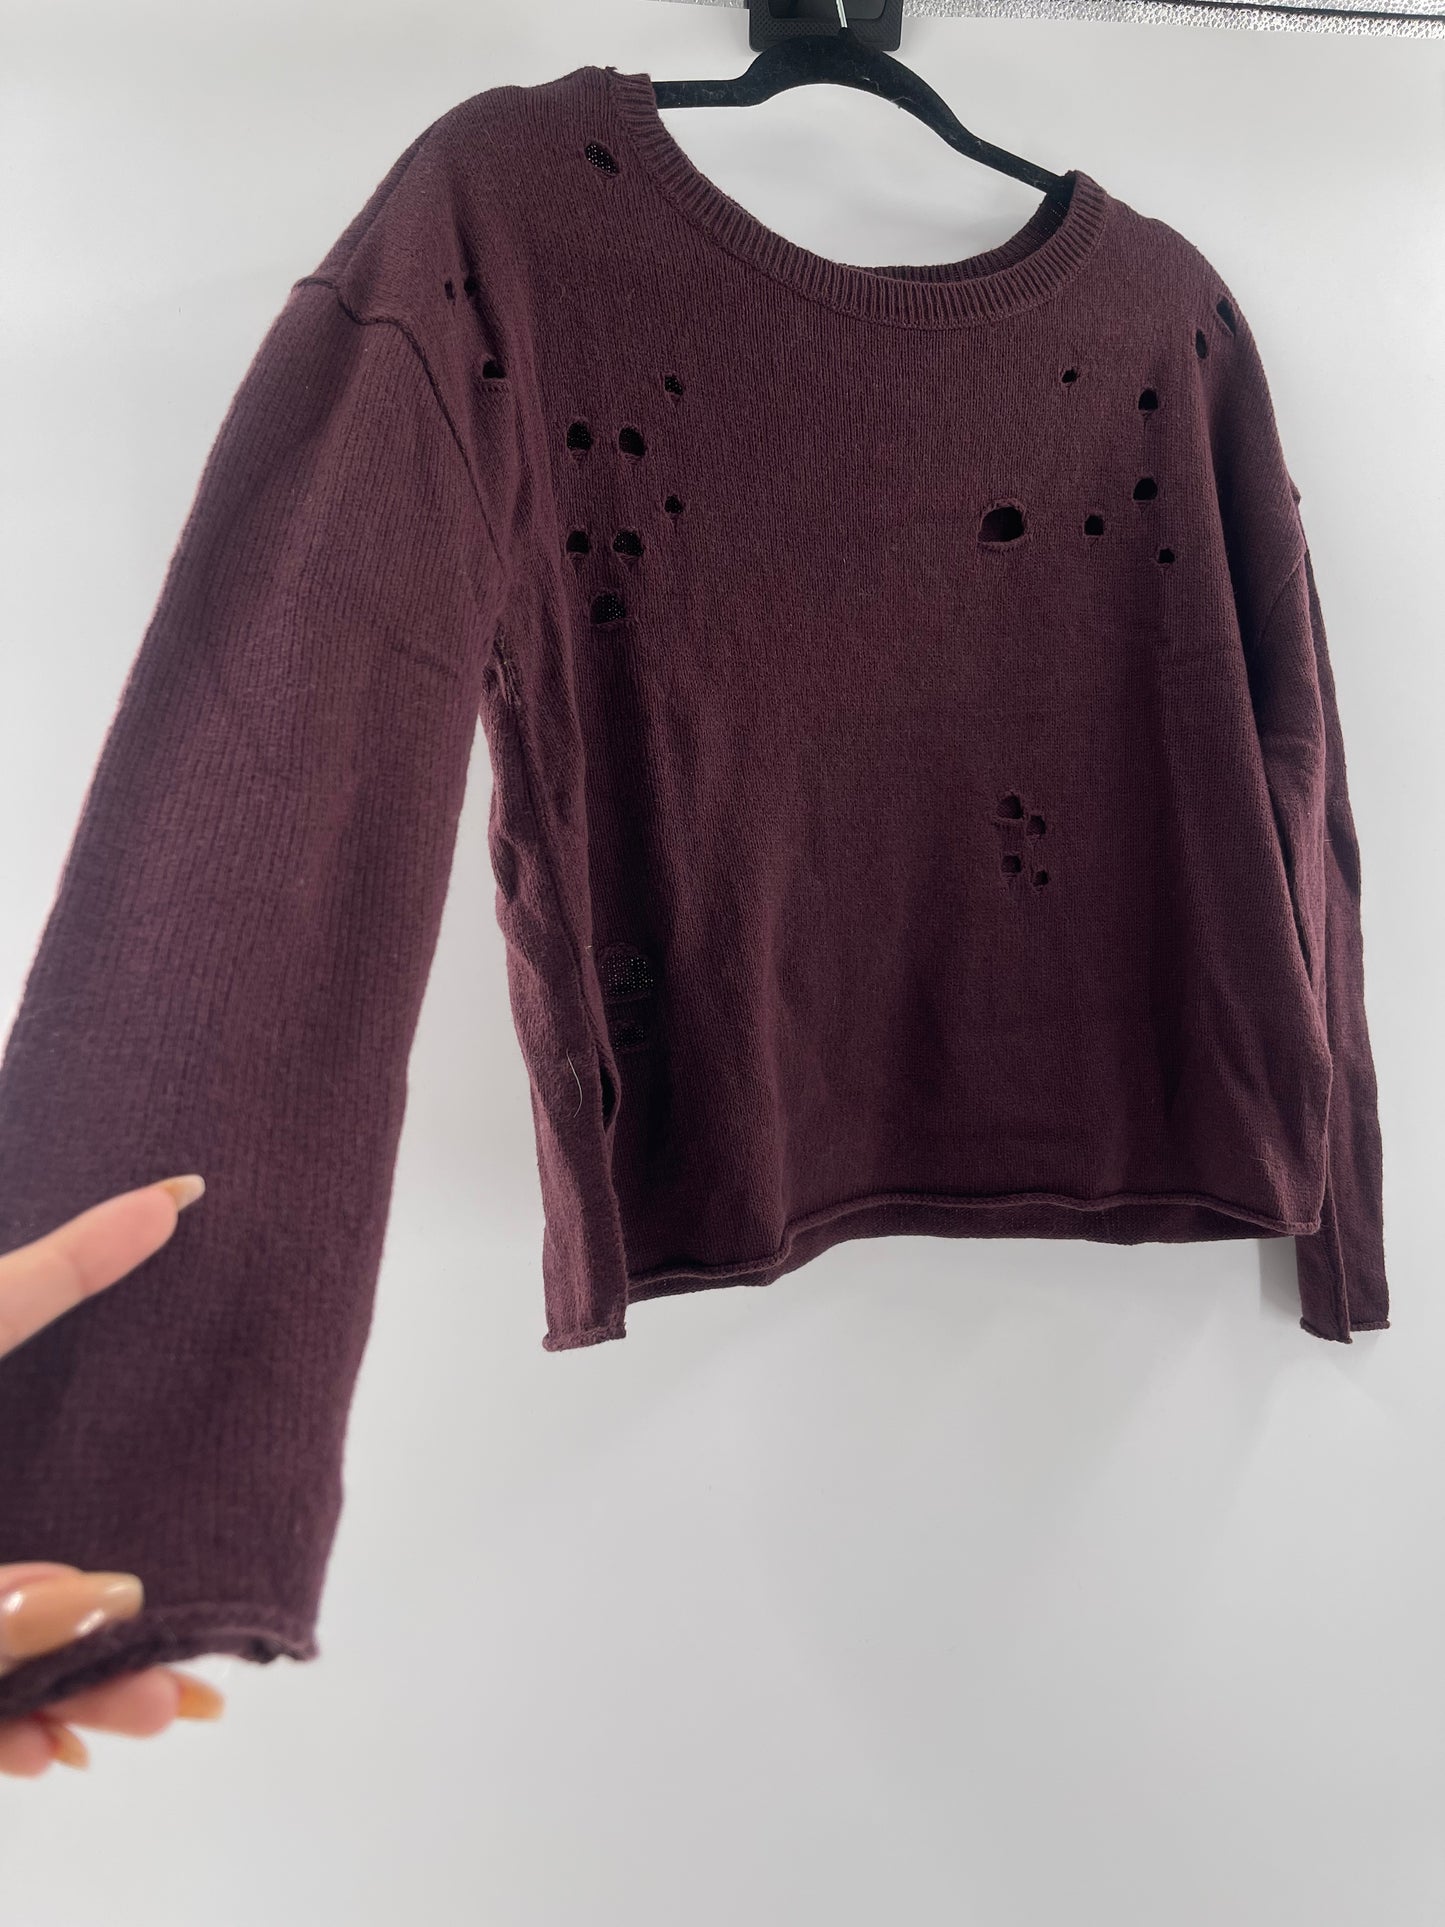 Urban Outfitters Distressed Burgundy Sweater (Small)